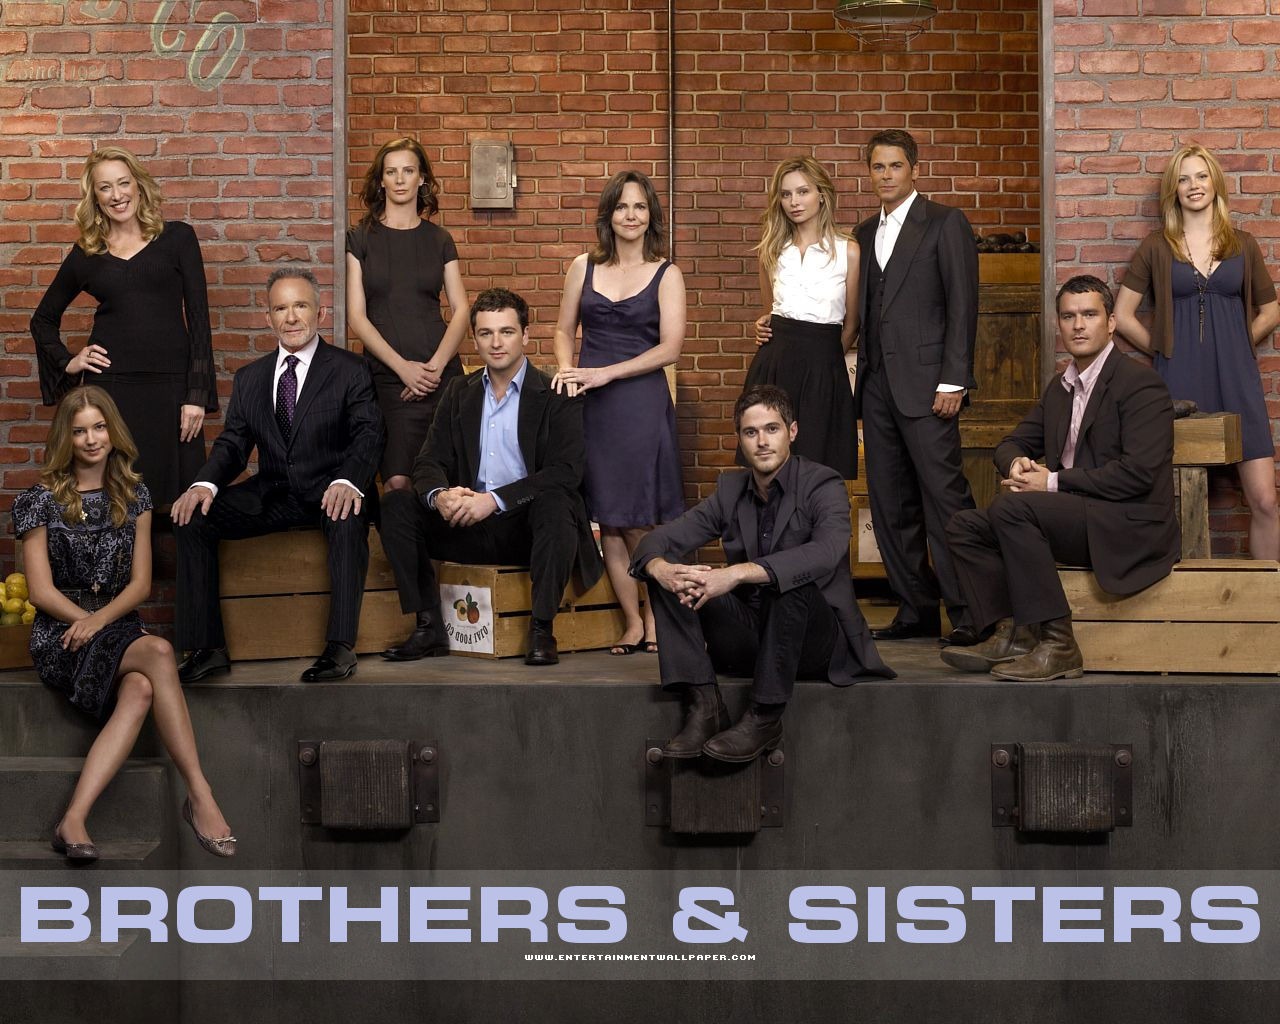 Brothers & Sisters 兄弟姐妹22 - 1280x1024